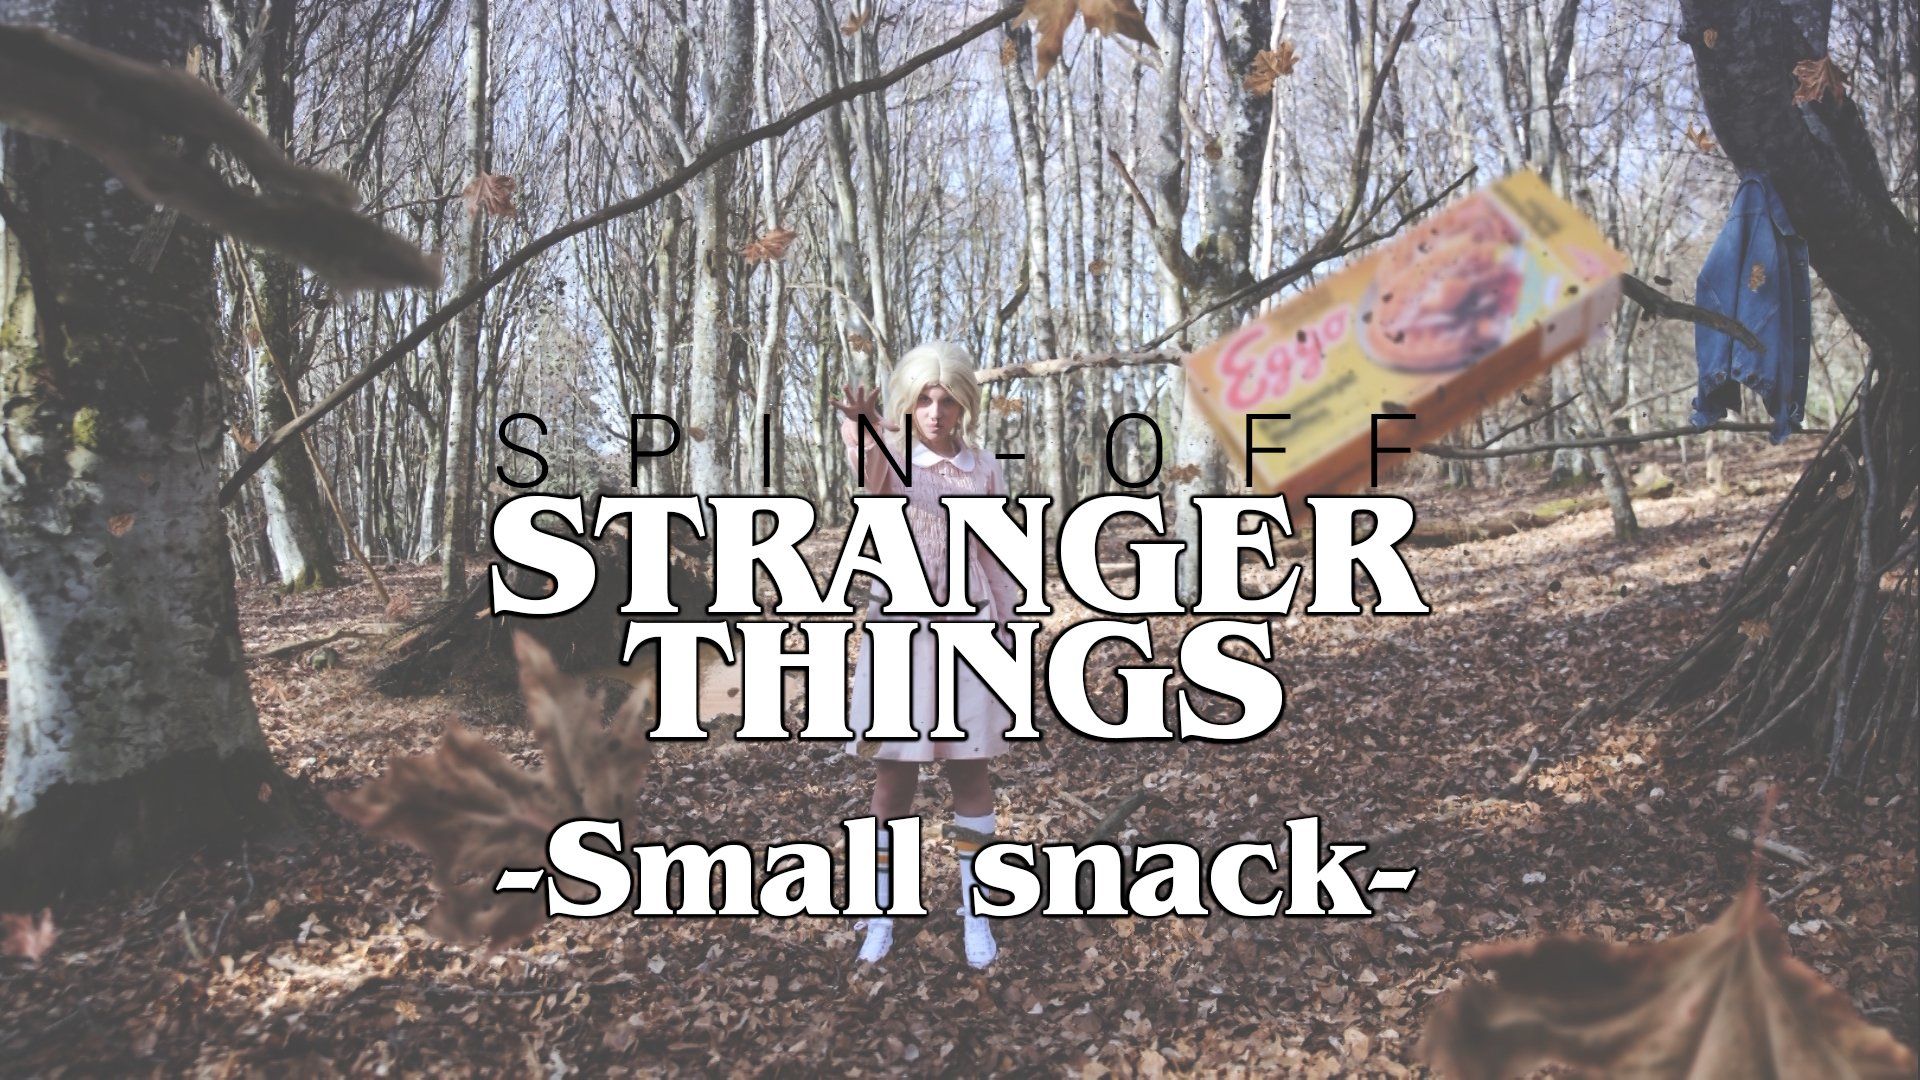 Spin-off , Stranger things | small snack